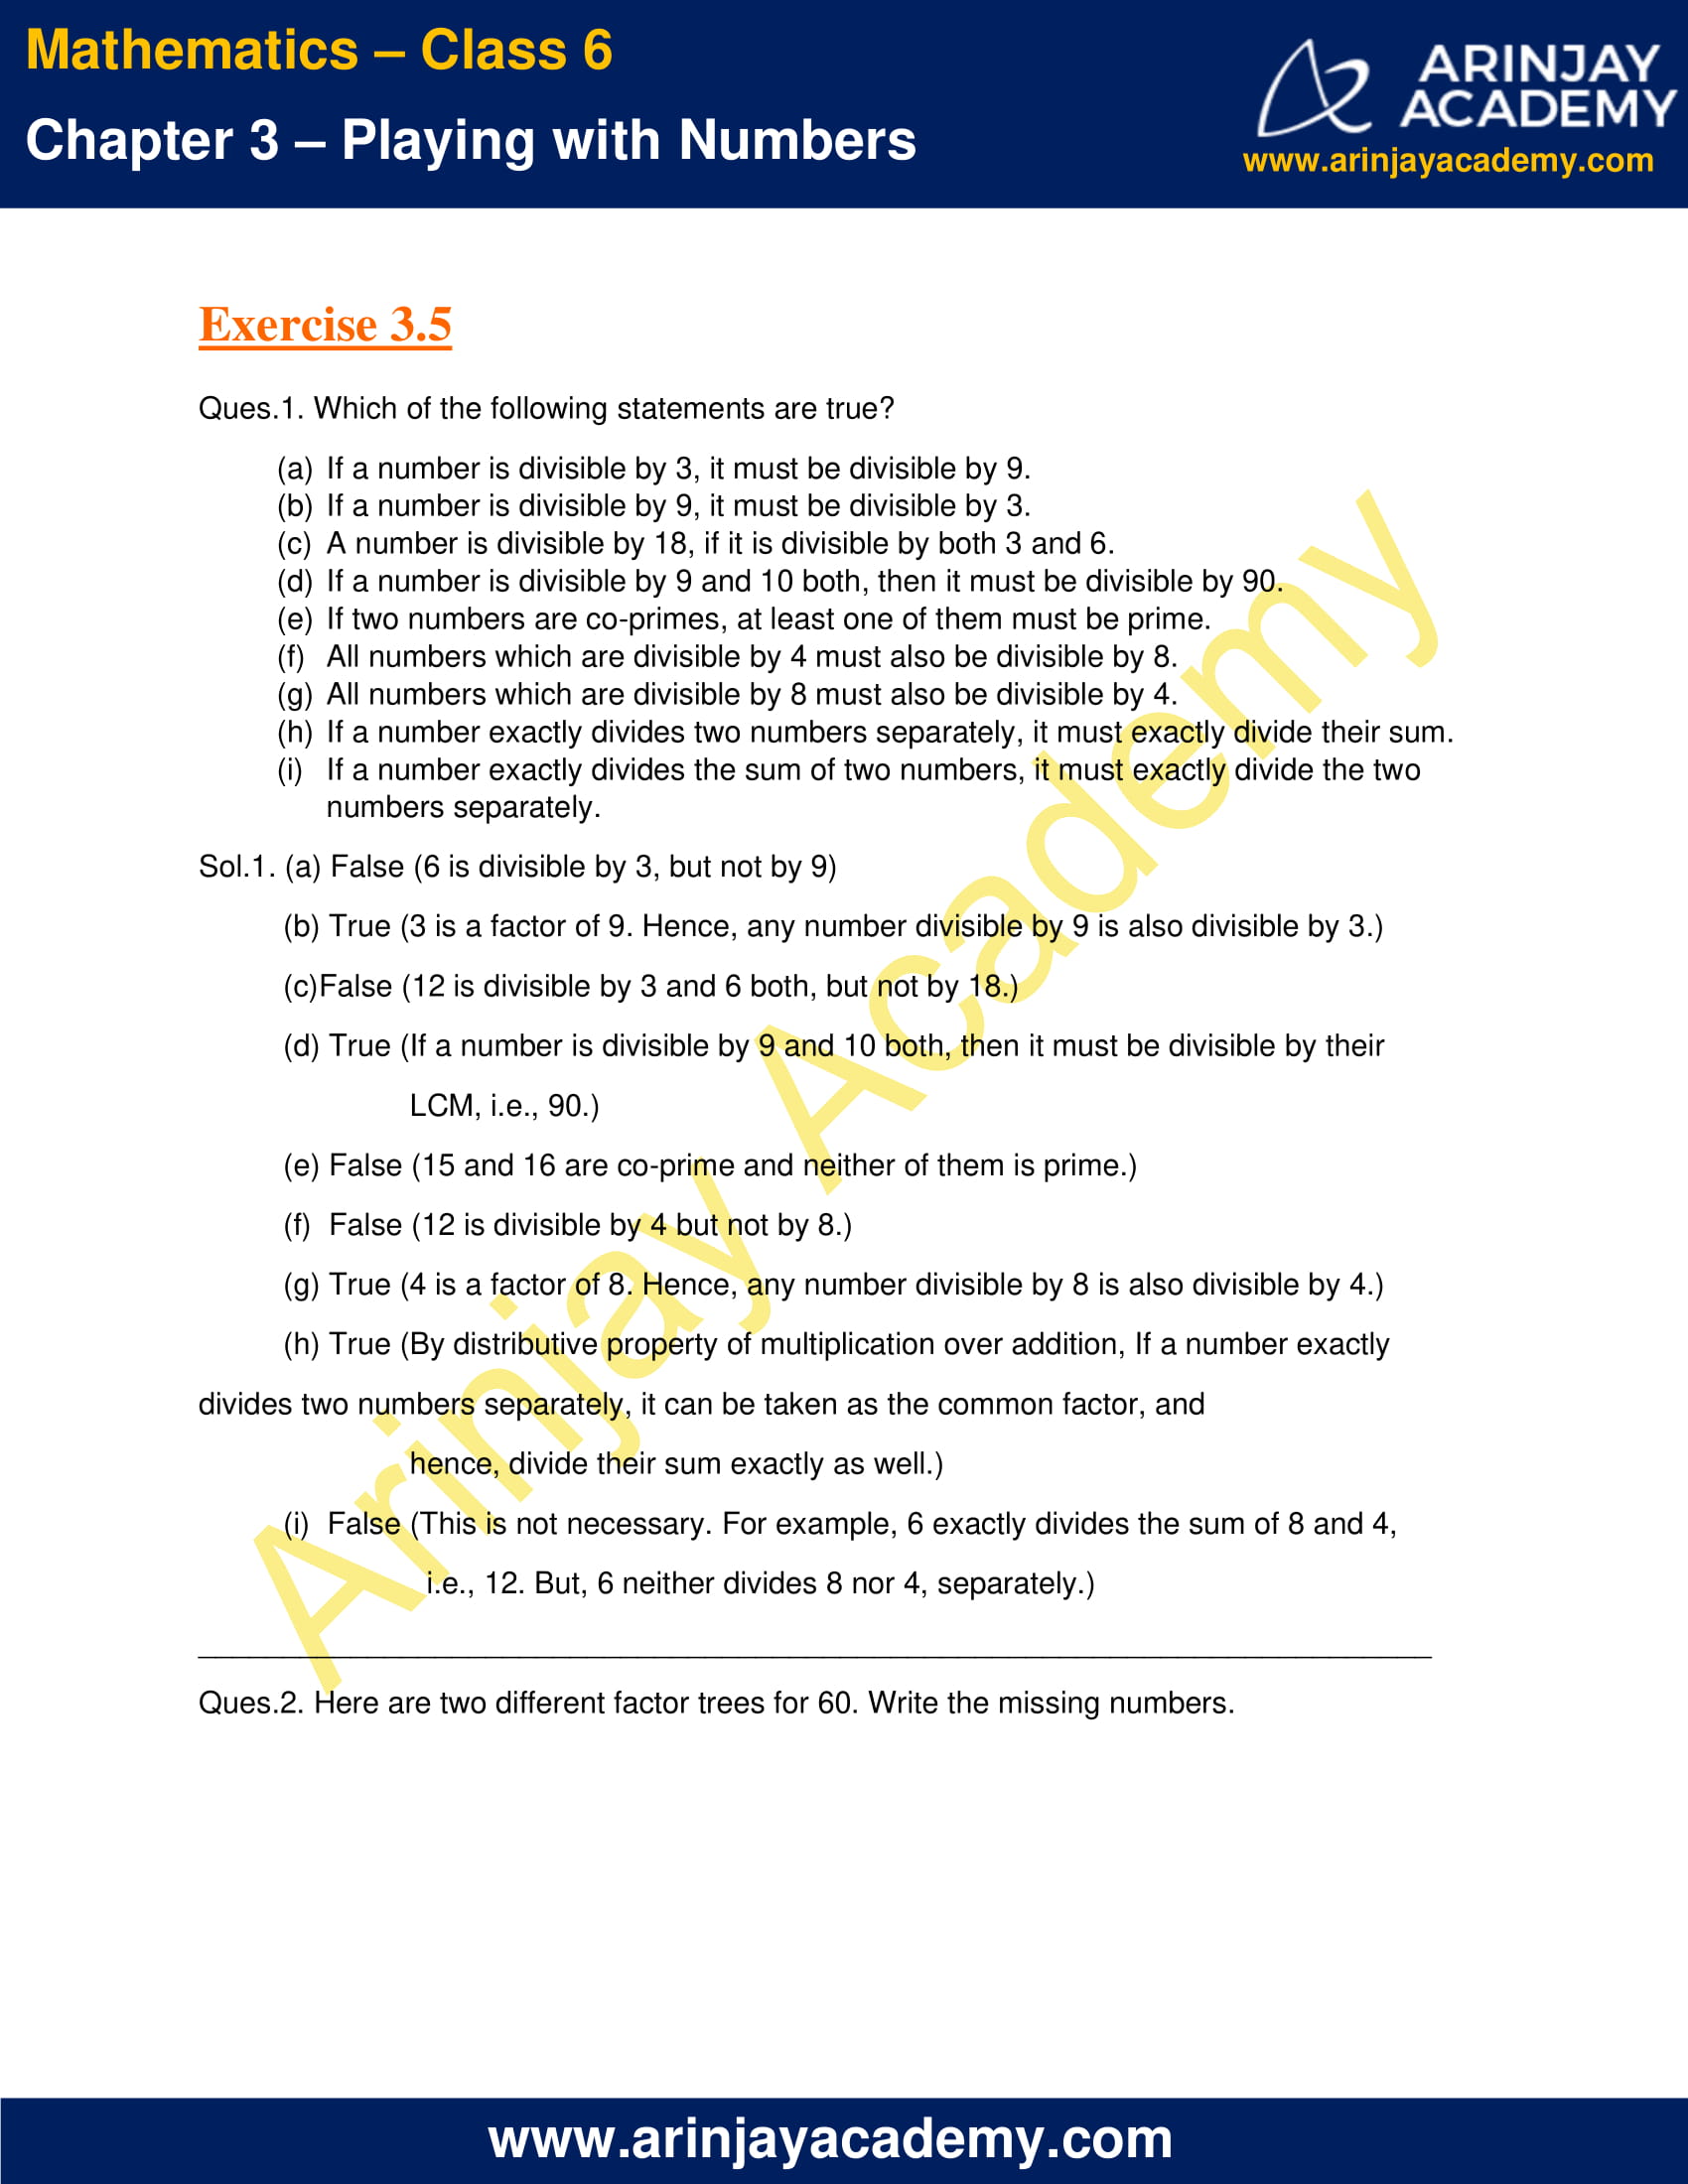 NCERT Solutions for Class 6 Maths Chapter 3 Exercise 3.5 image 1